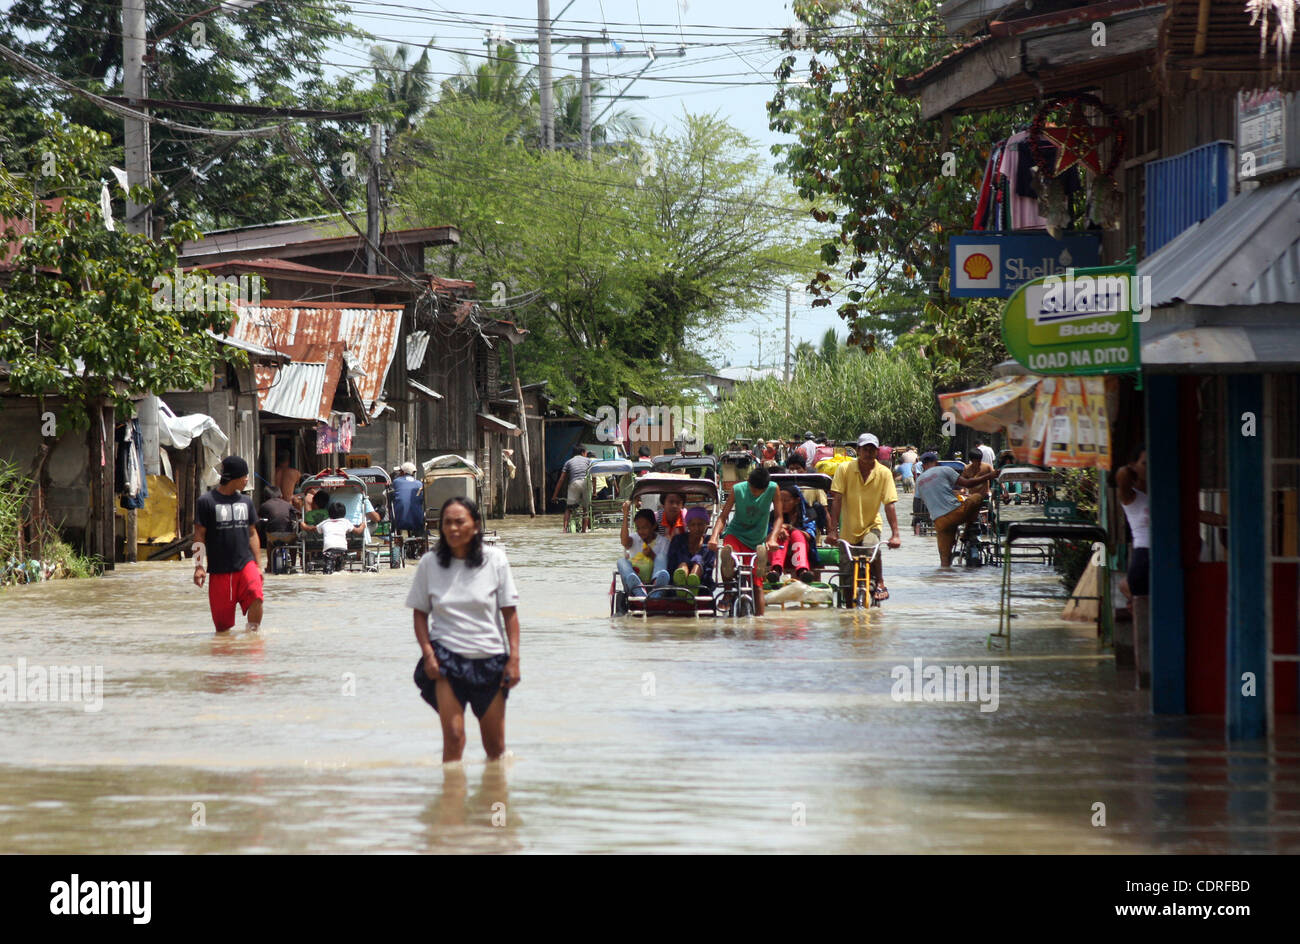 Jul 1, 2011 - Sultan Kudarat, Philippines - Filipino residents displaced by widespread flash floods are seen in the southern town of Sultan Kudarat in the Philippines, Friday. Flood waters in the region caused by the clogging of tons of water lilies subsided but in the city of Davao, flash floods on Stock Photo